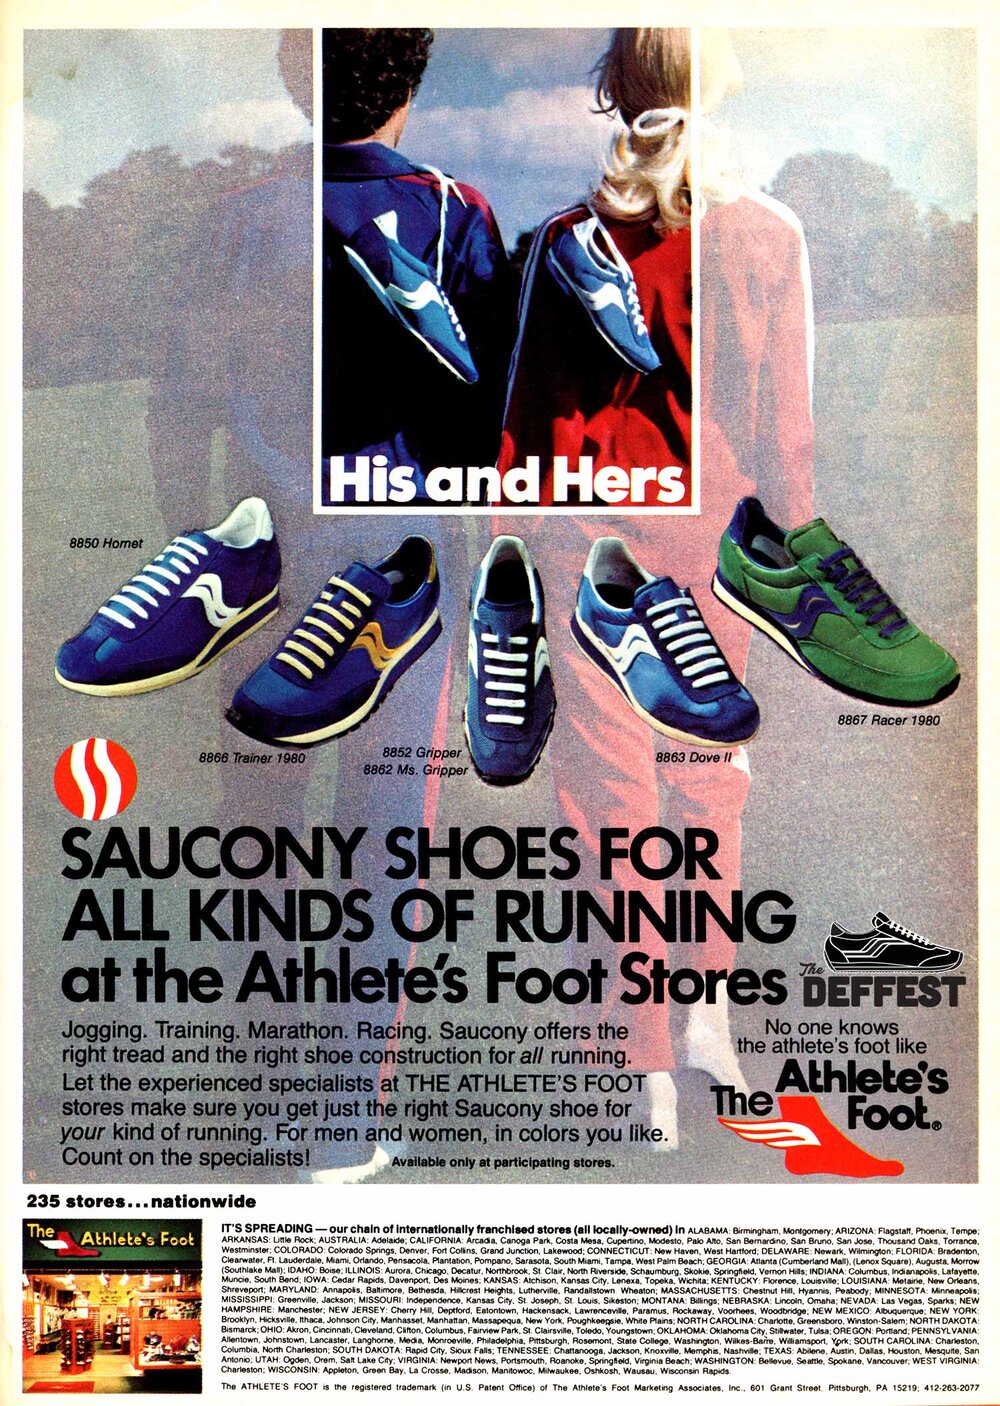 Saucony Hornet sneakers — The Deffest®. A vintage and retro 